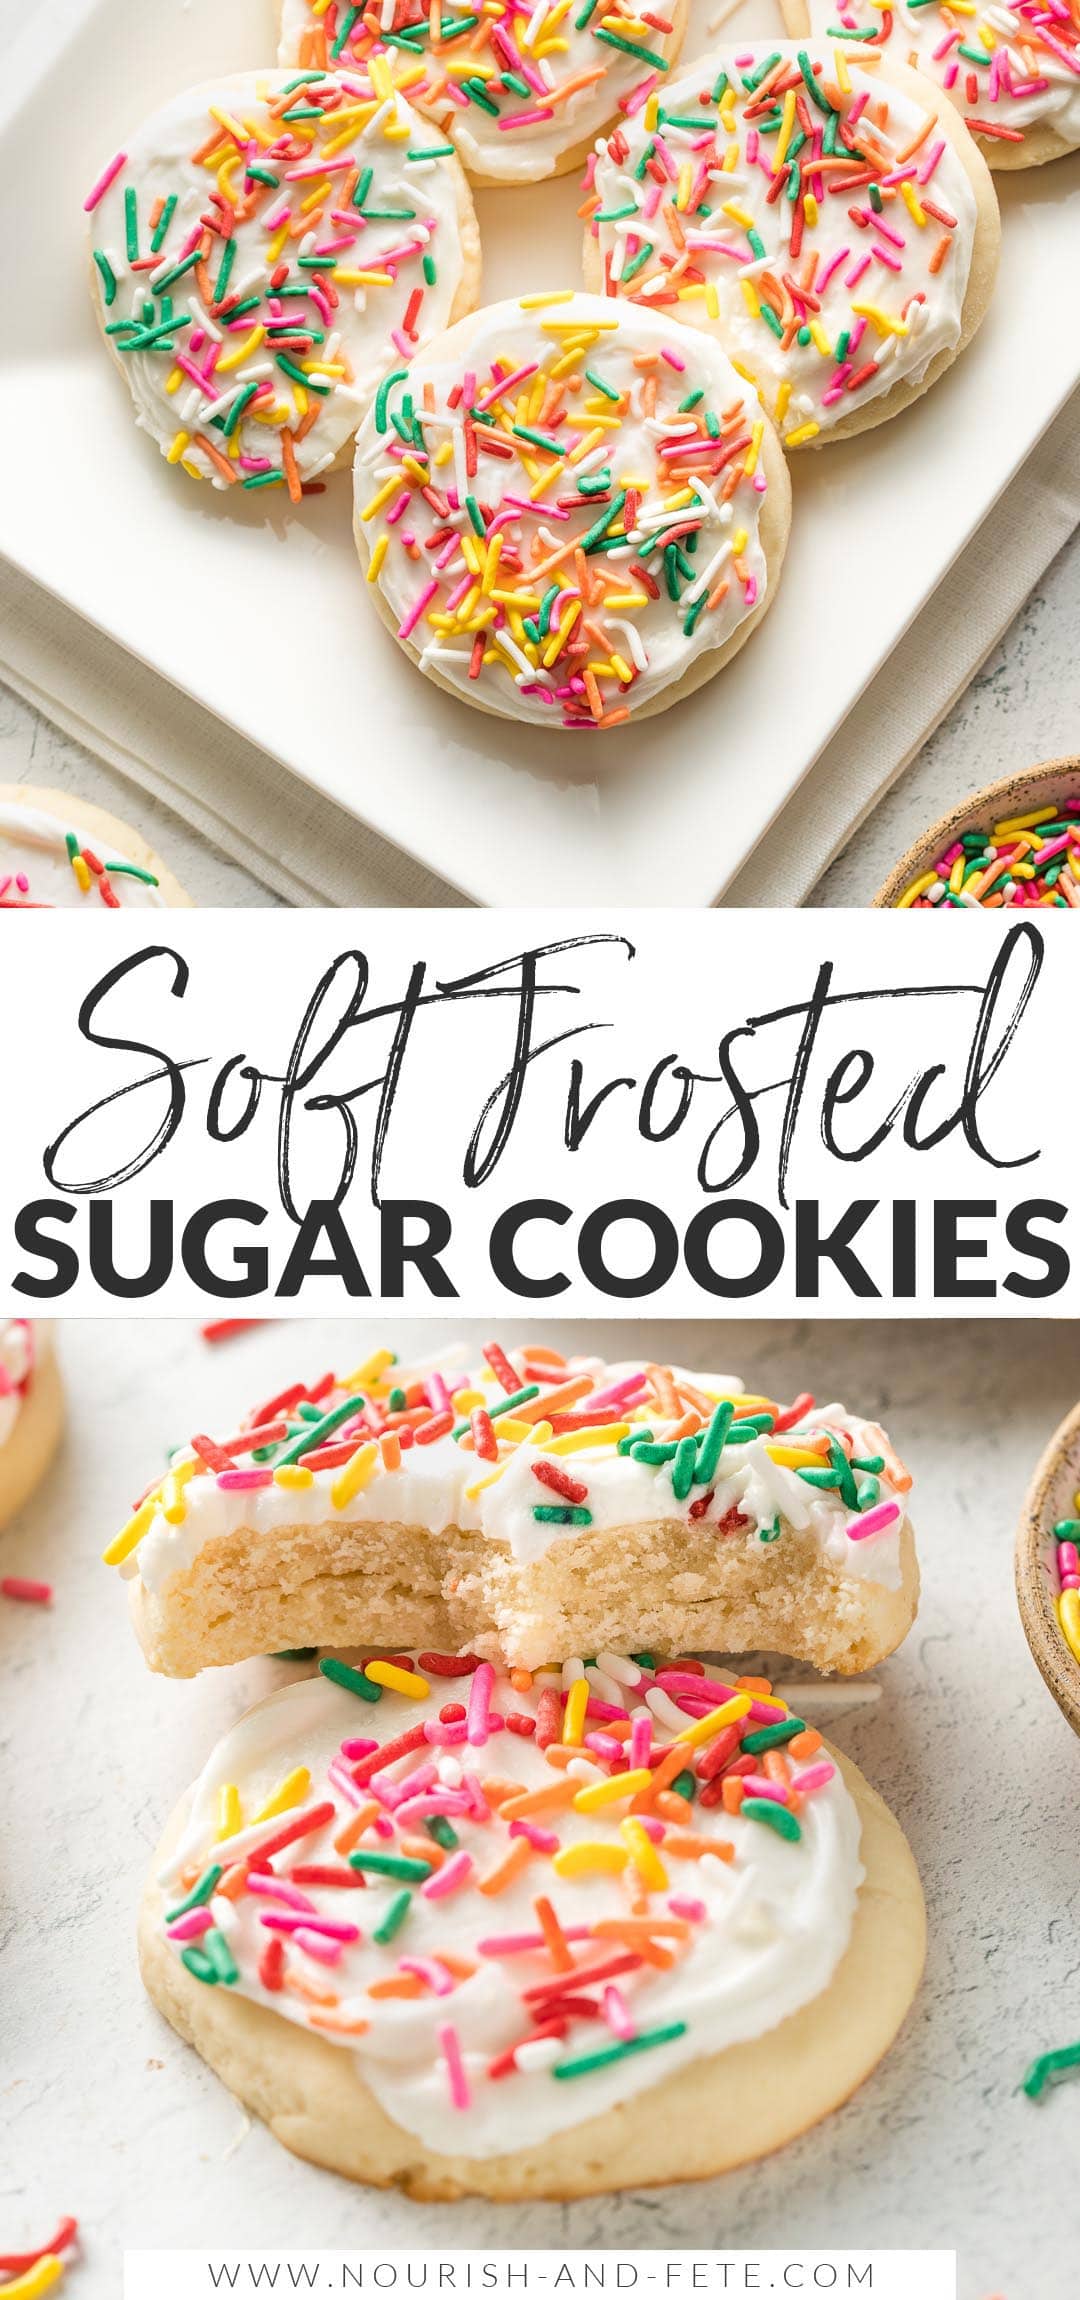 Soft Frosted Sugar Cookies - Nourish and Fete